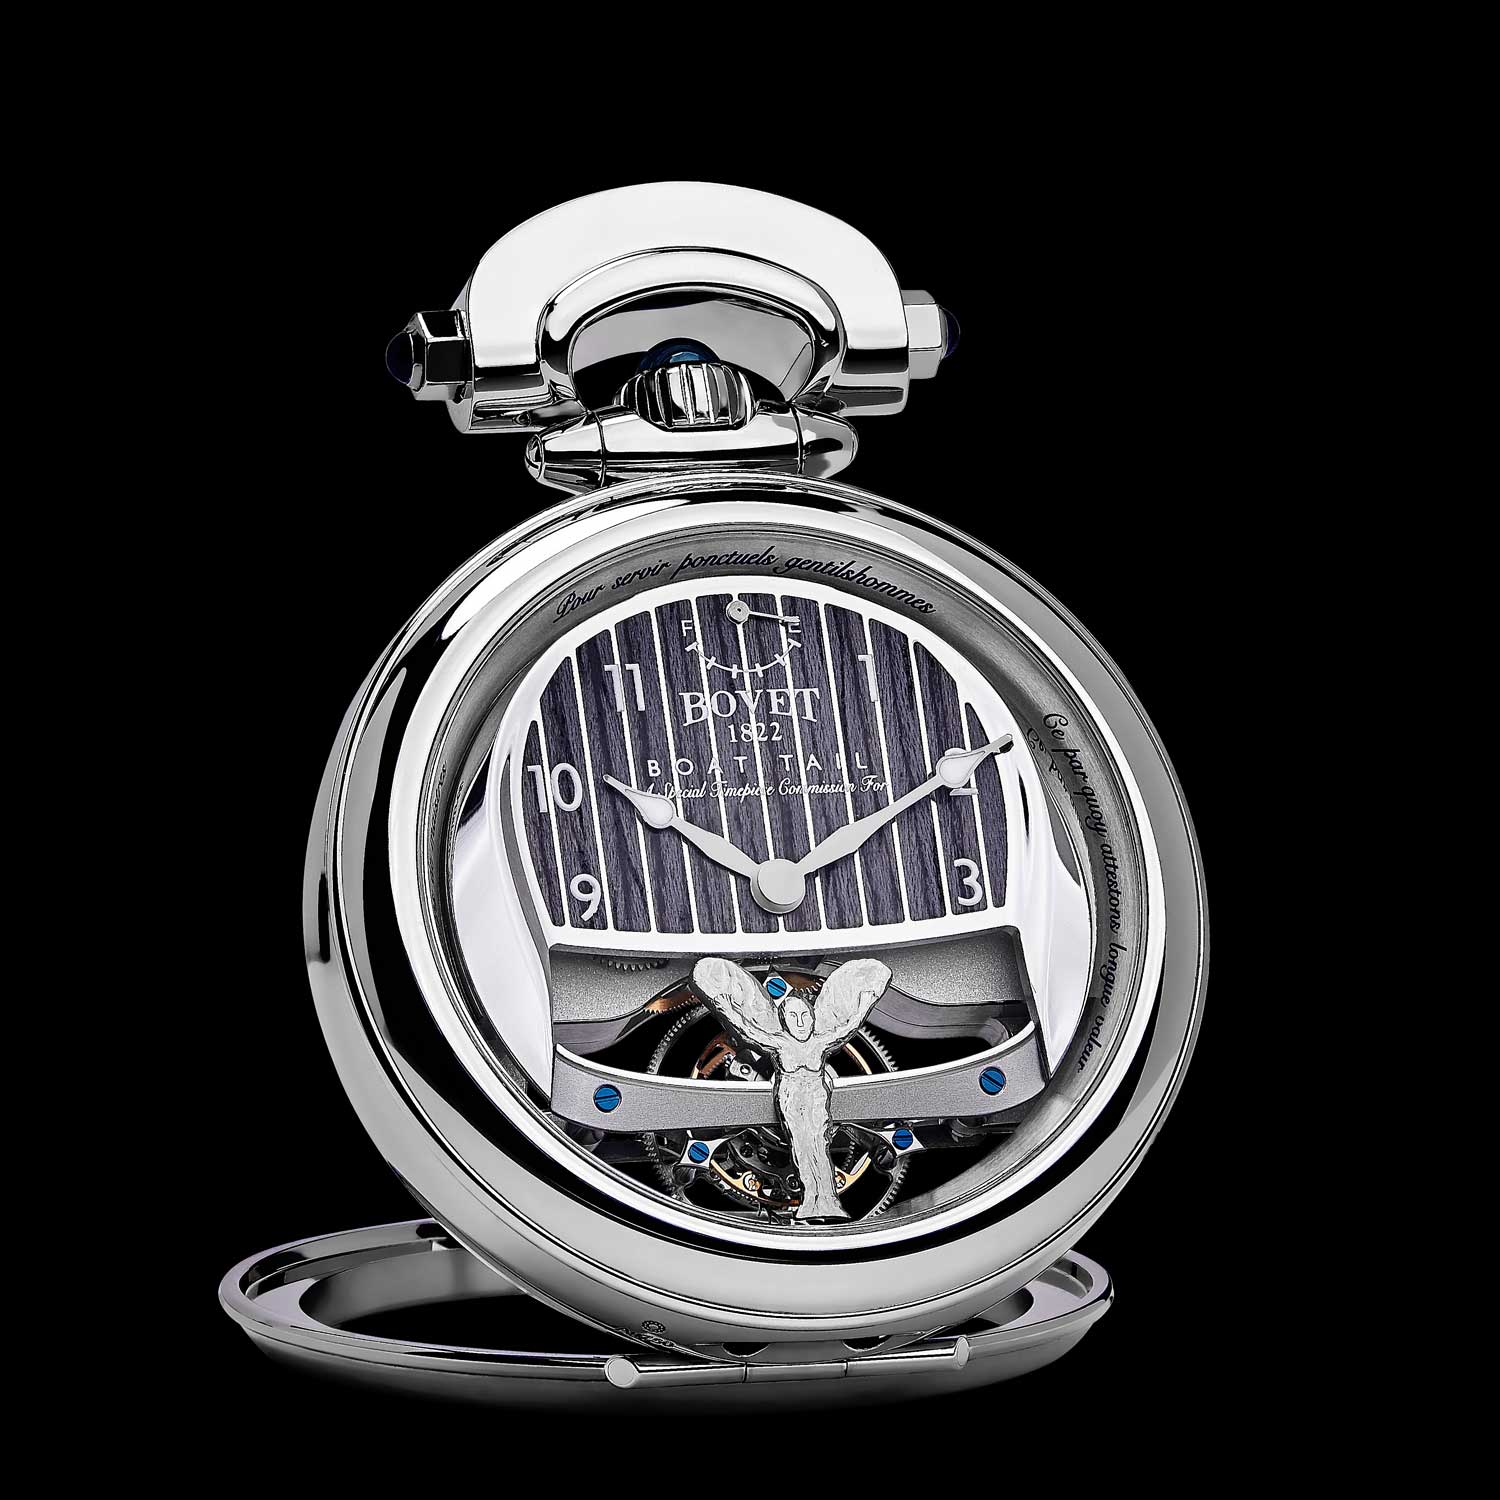 These intricate timepieces can transform from a wristwatch to a pocket/pendant watch to a desk clock as well as a dashboard clock.